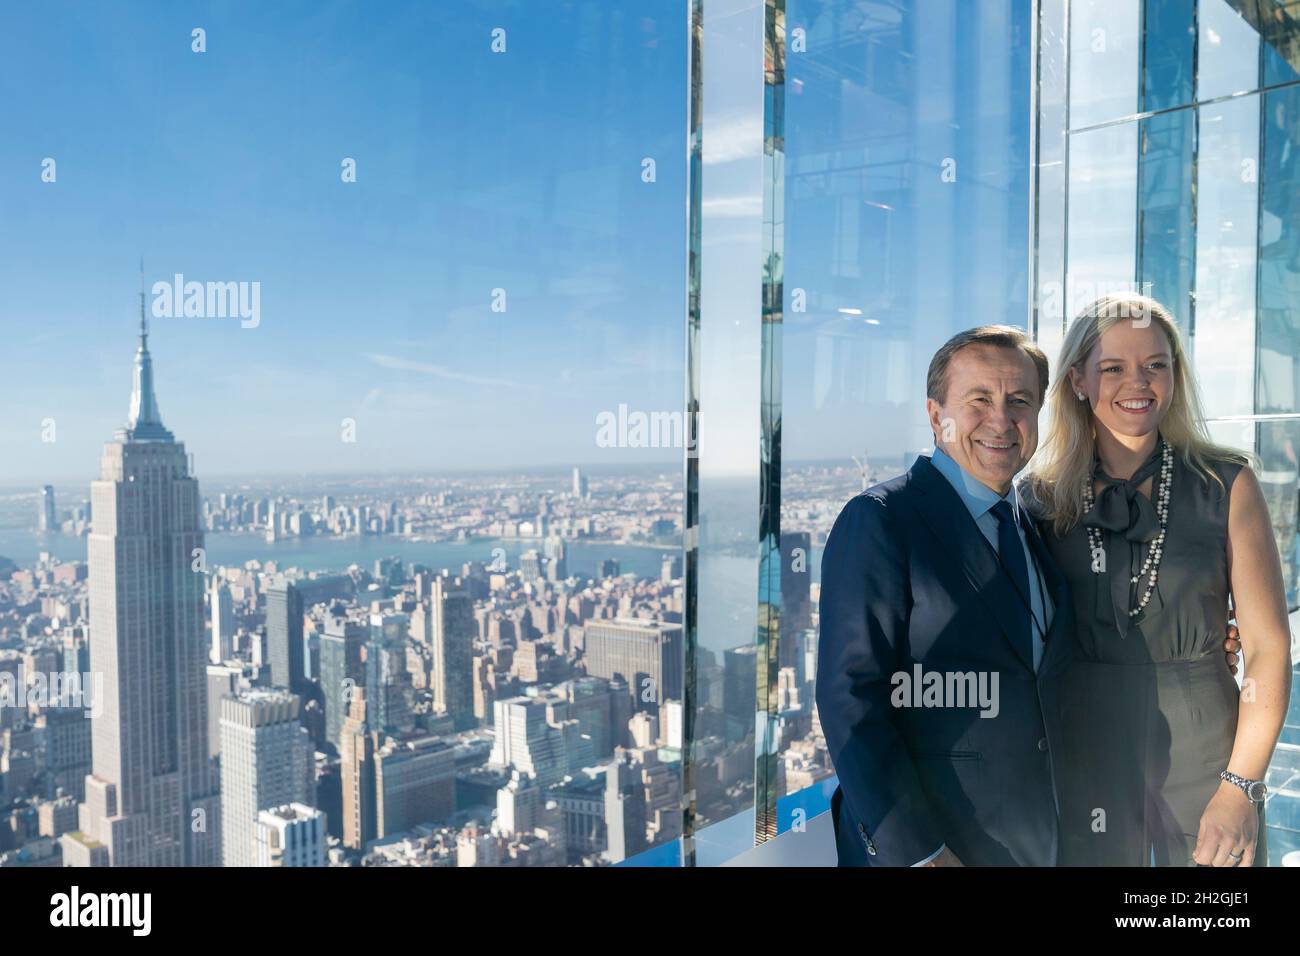 New York, USA. 21st Oct, 2021. Restaurateur Daniel Boulud and wife Katherine Gage seen on Summit One Vanderbilt observation deck during grand opening in New York on October 21, 2021. Grand opening was attended by many VIP guests including Brooklyn Borough President and Democratic Party nominee for mayor in upcoming election, Lieutenant Governor Brian Benjamin, artist Kenzo Digital, State senator Brad Hoylman, restaurateur Daniel Boulud. (Photo by Lev Radin/Sipa USA) Credit: Sipa USA/Alamy Live News Stock Photo